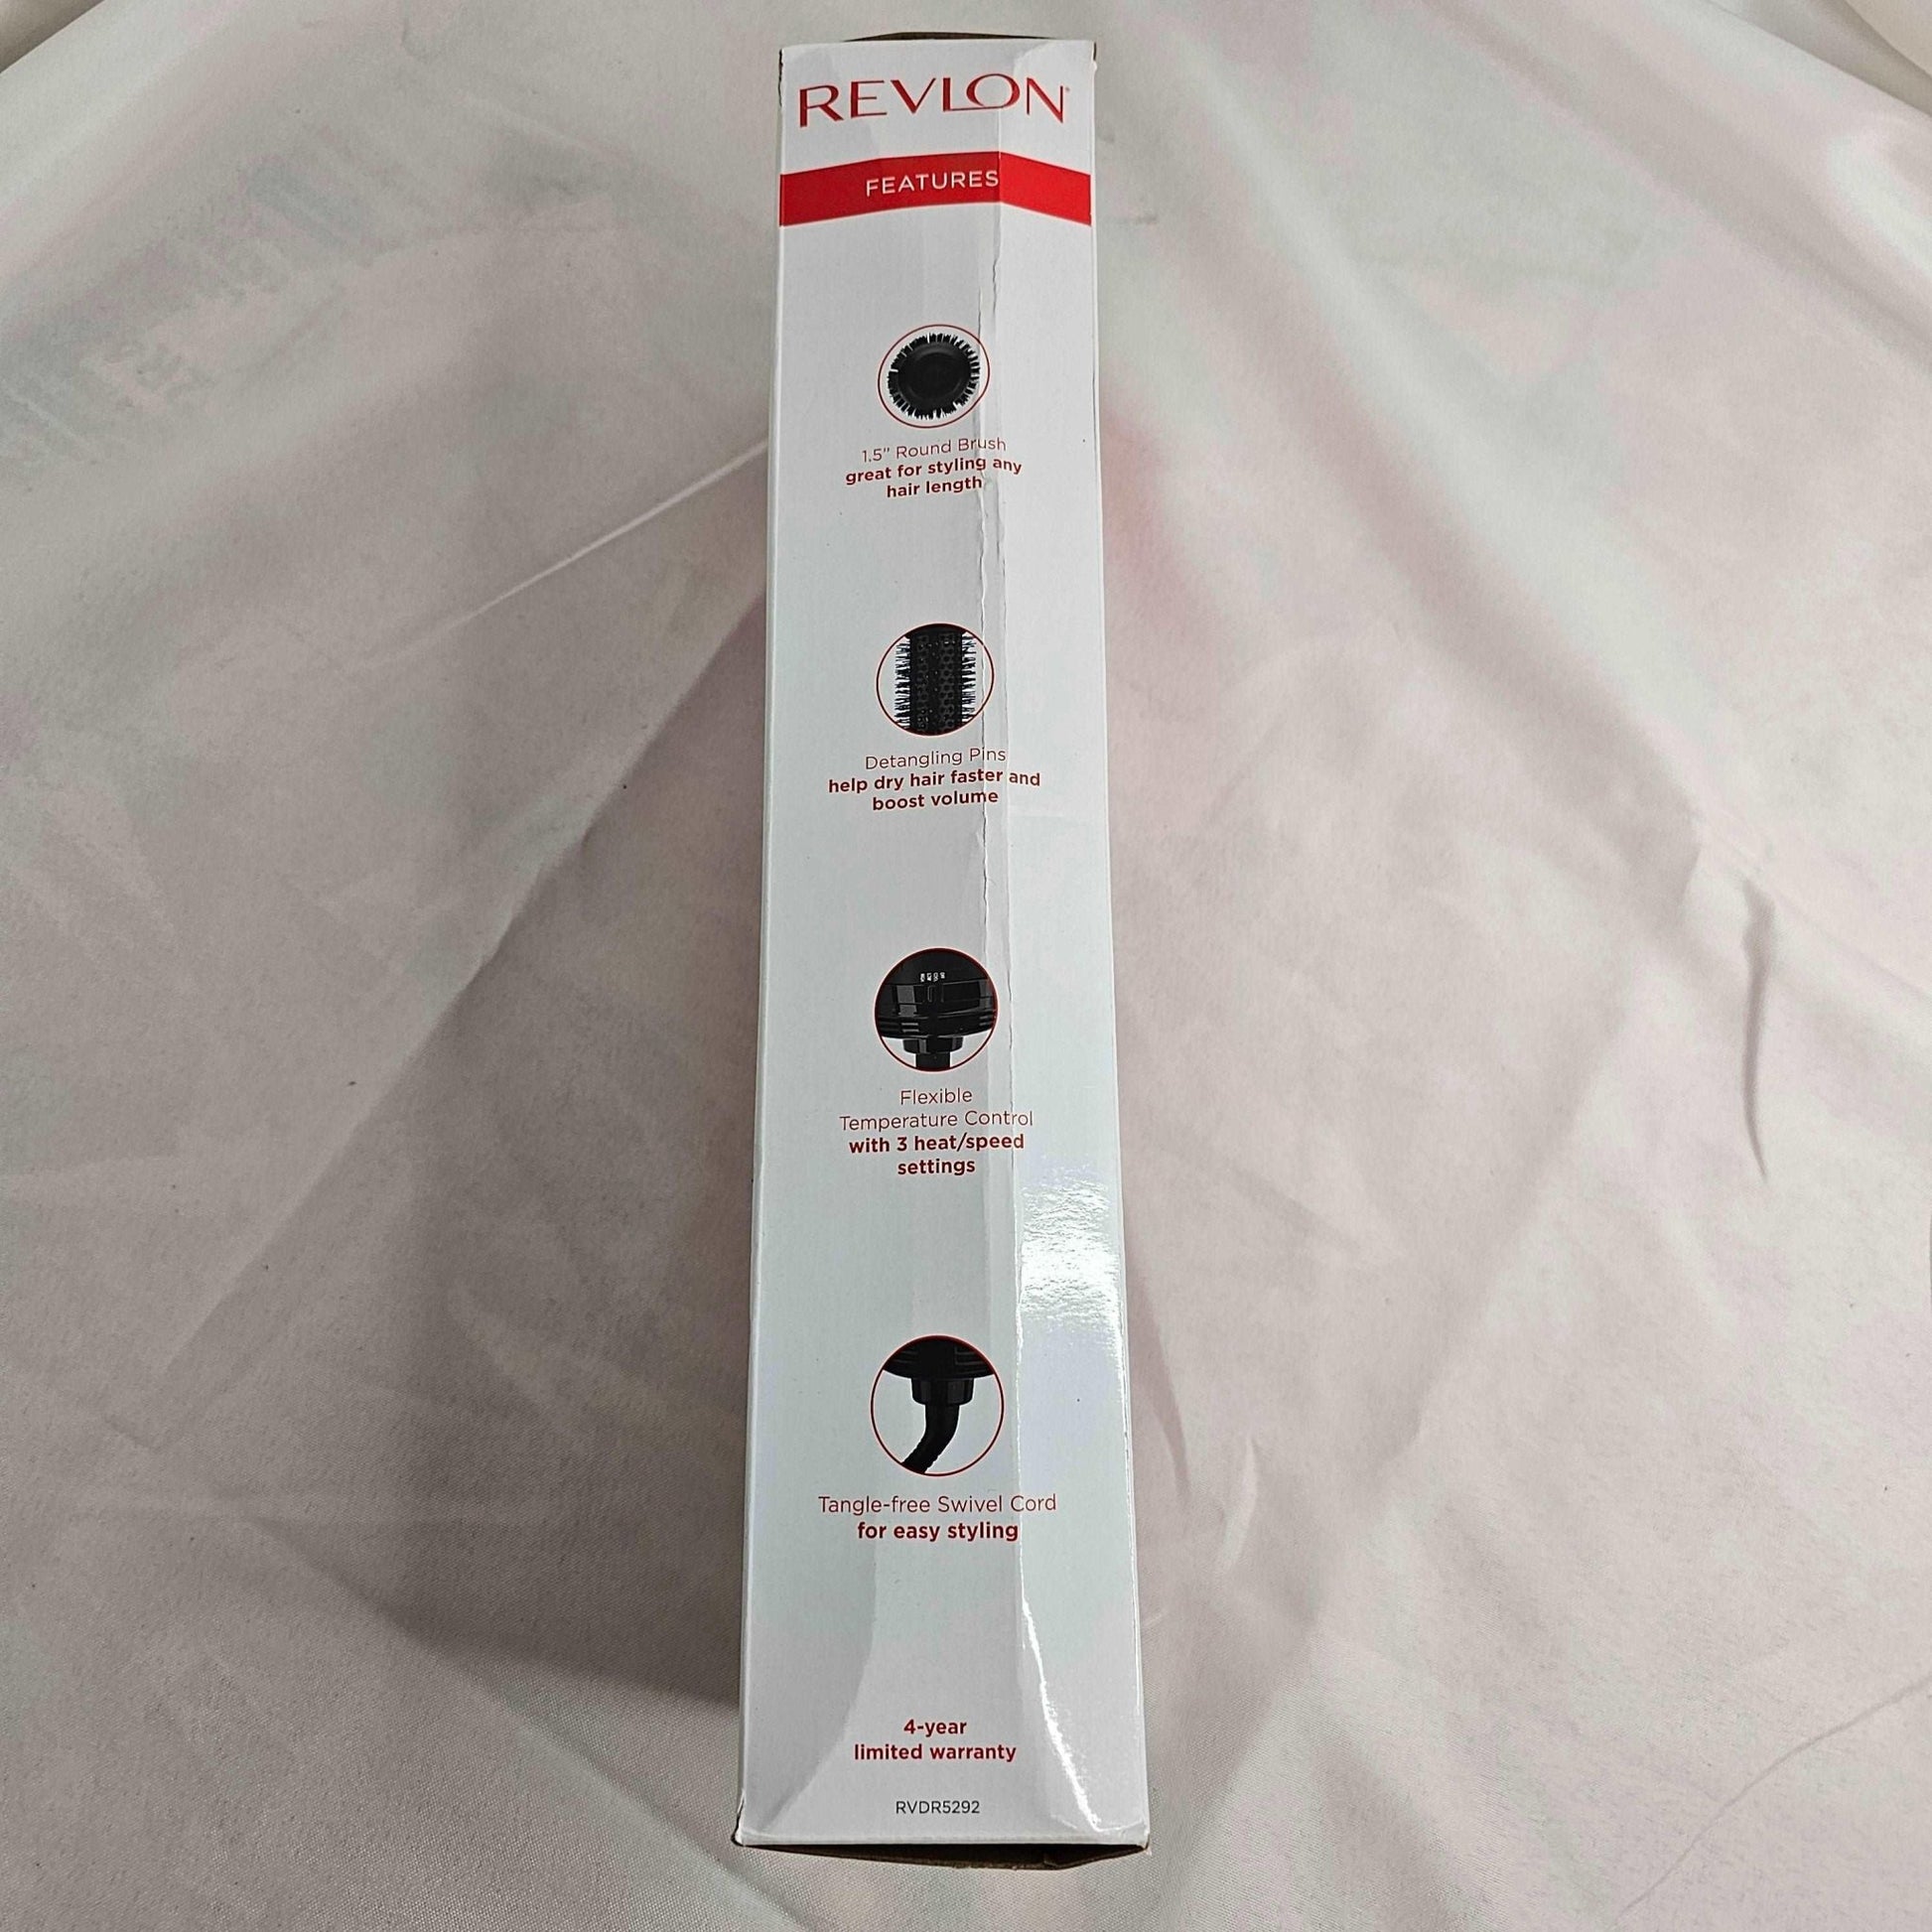 Revlon One-Step Root Booster Round Brush Dryer and Styler - RVDR5292 - DQ Distribution